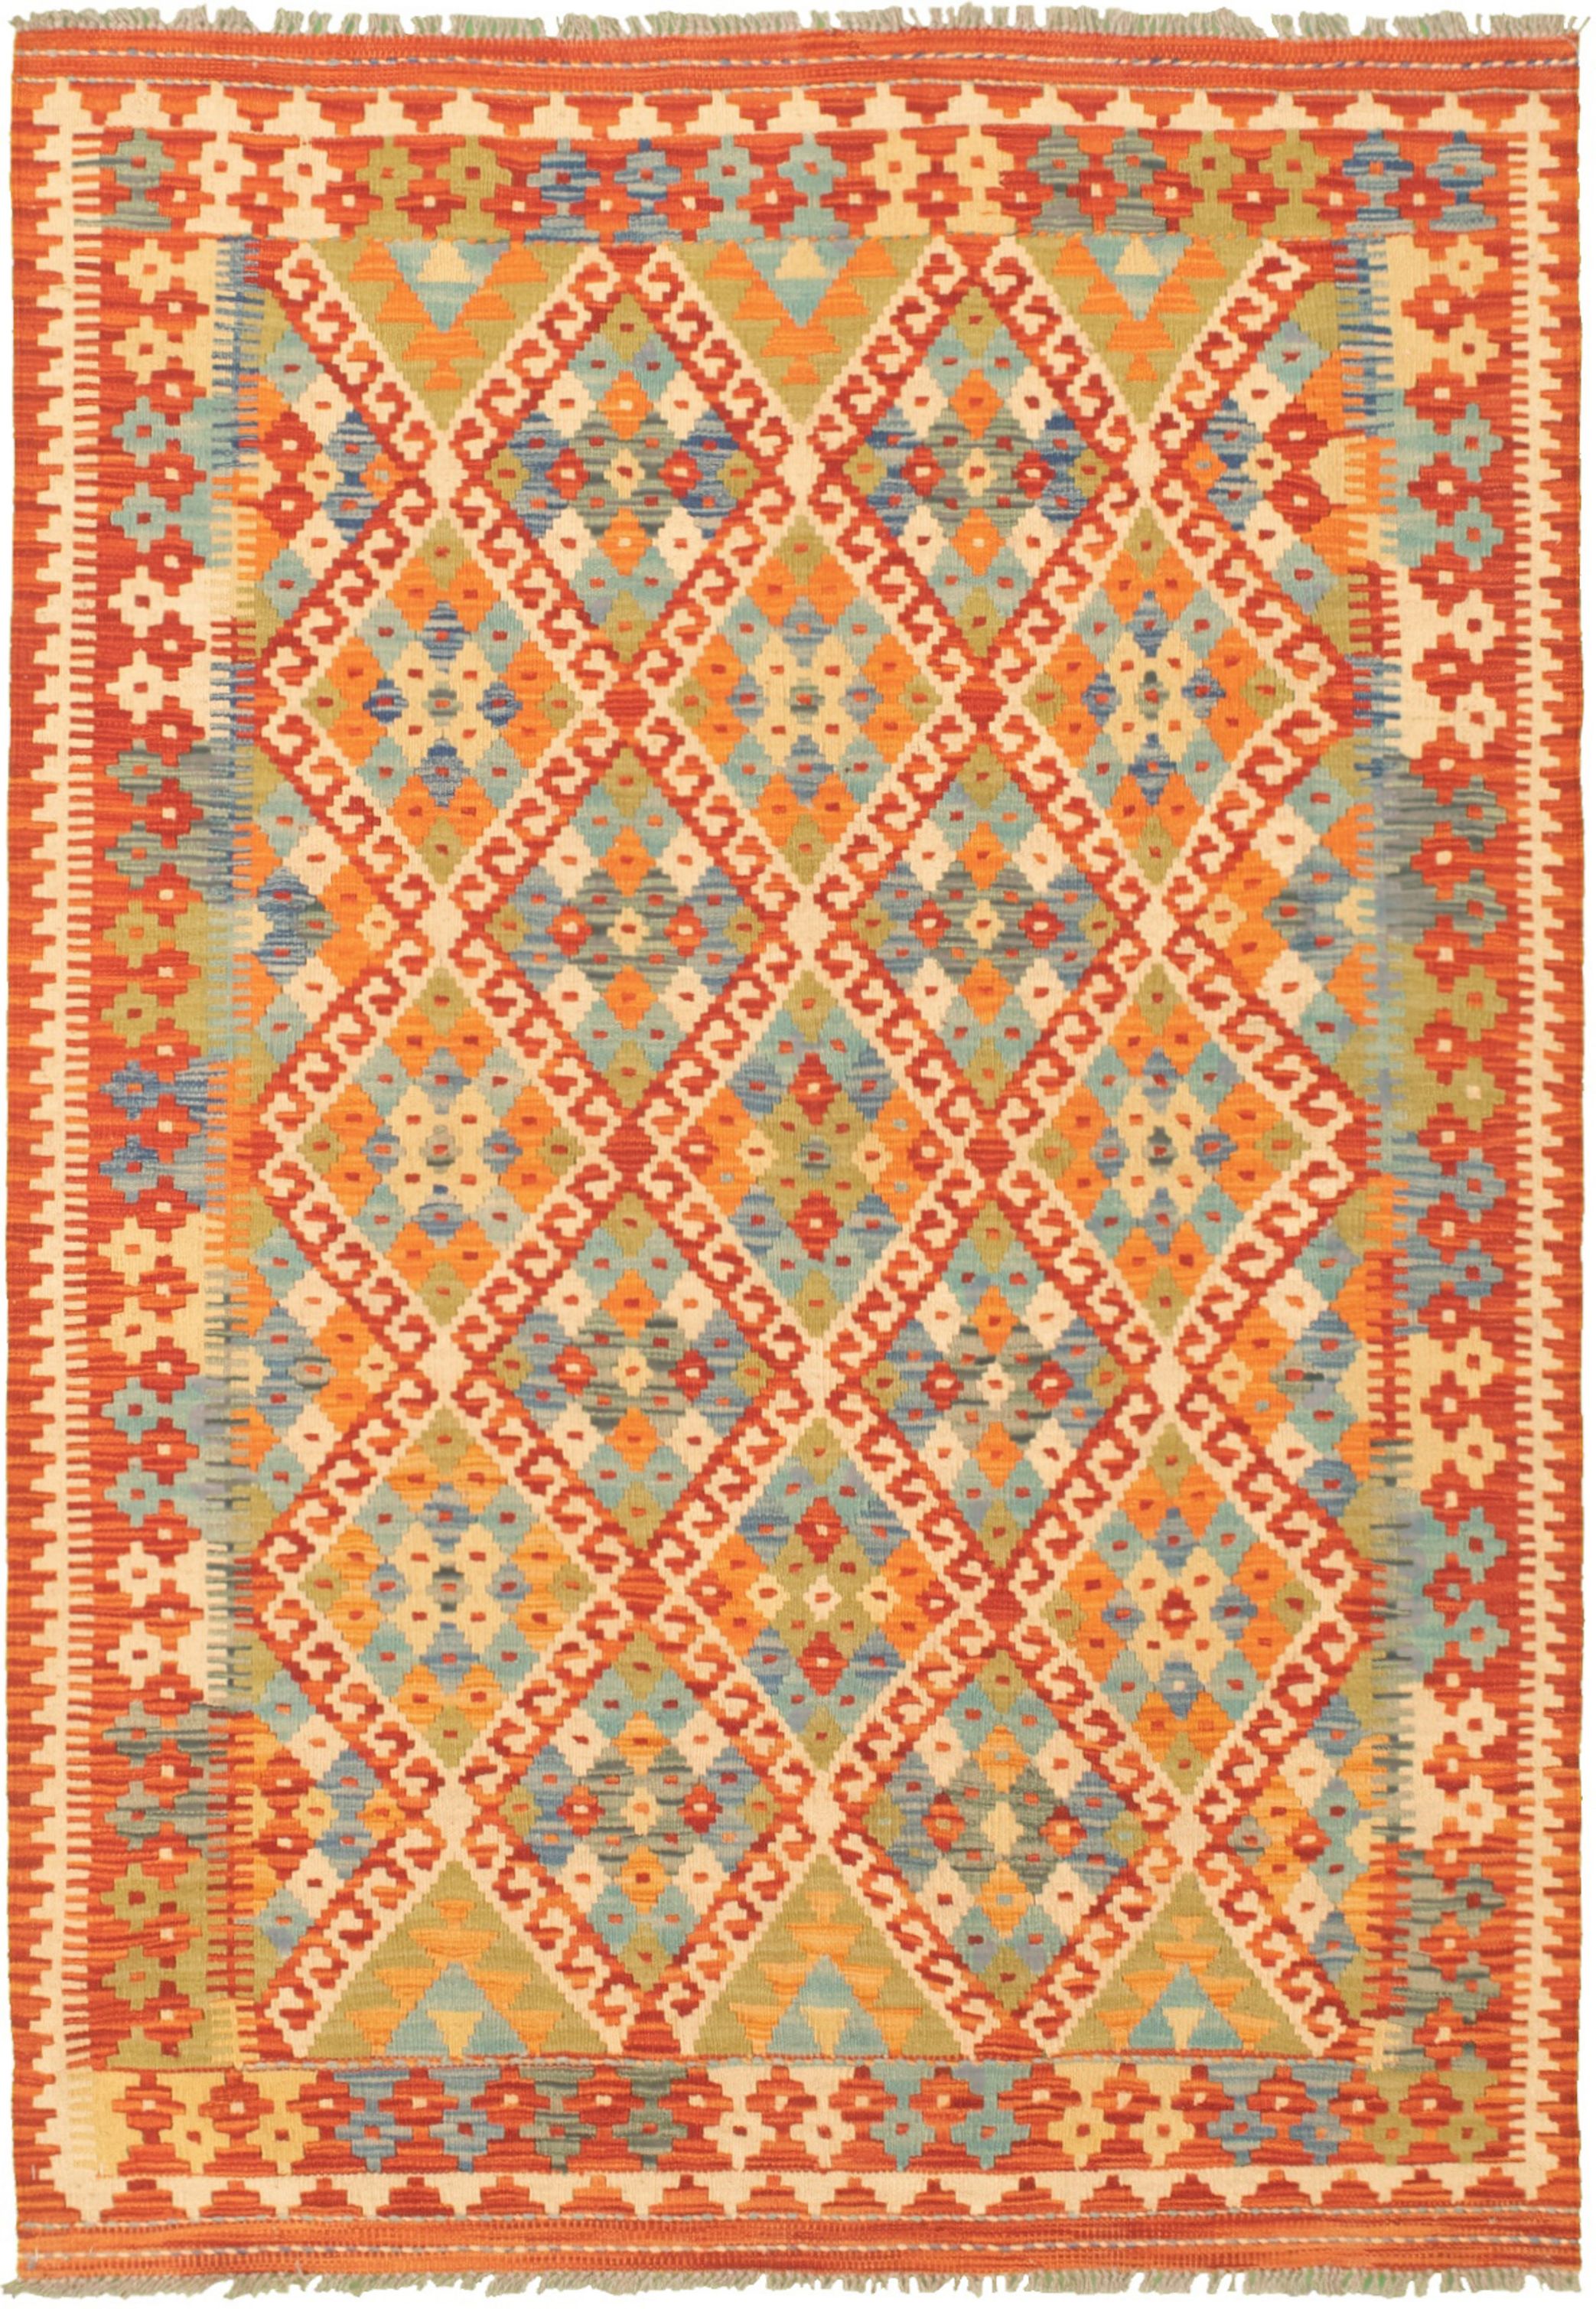 Hand woven Bold and Colorful  Dark Copper Wool Kilim 4'3" x 6'1" Size: 4'3" x 6'1"  